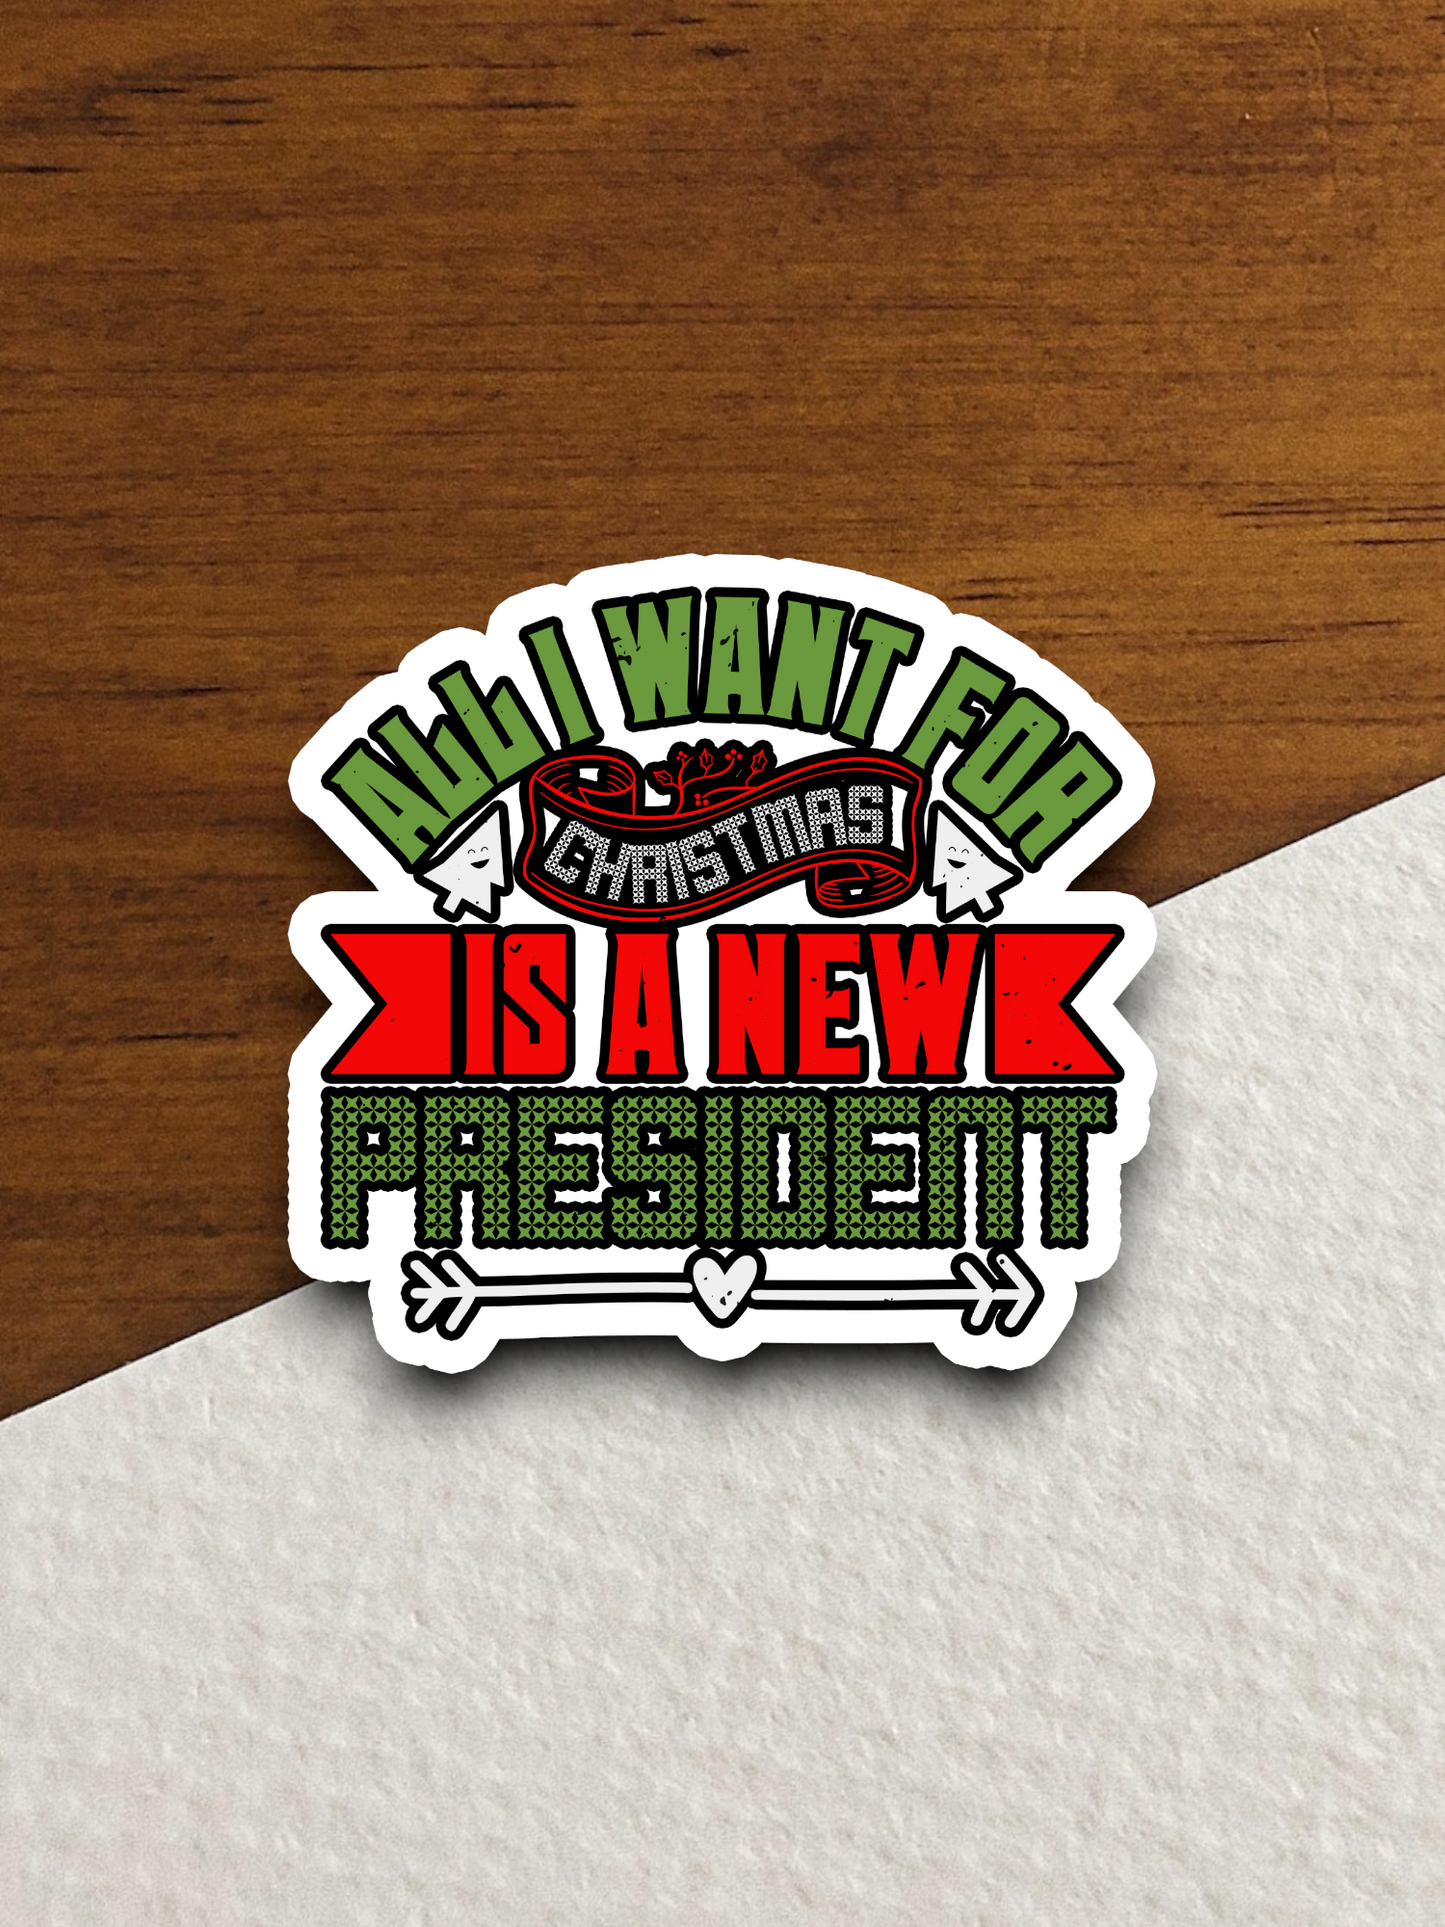 All I Want For Christmas Is a New President Sticker